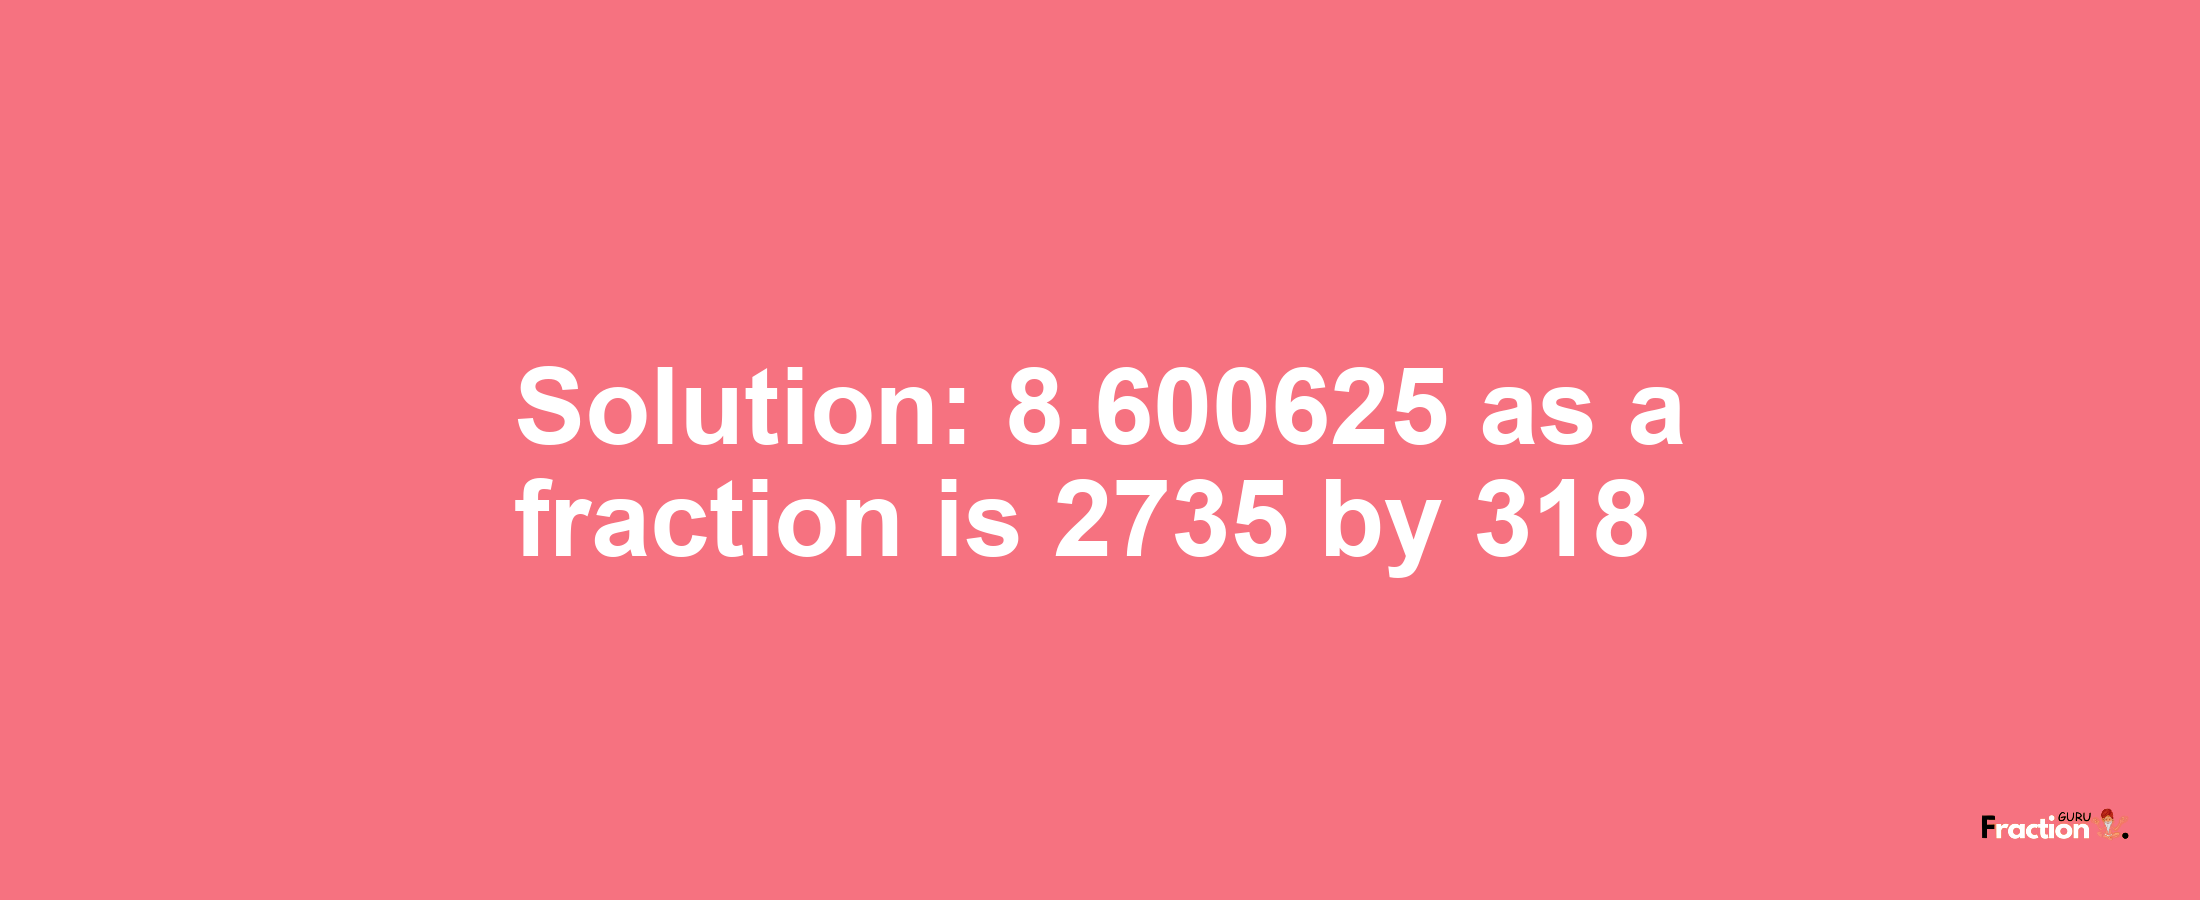 Solution:8.600625 as a fraction is 2735/318